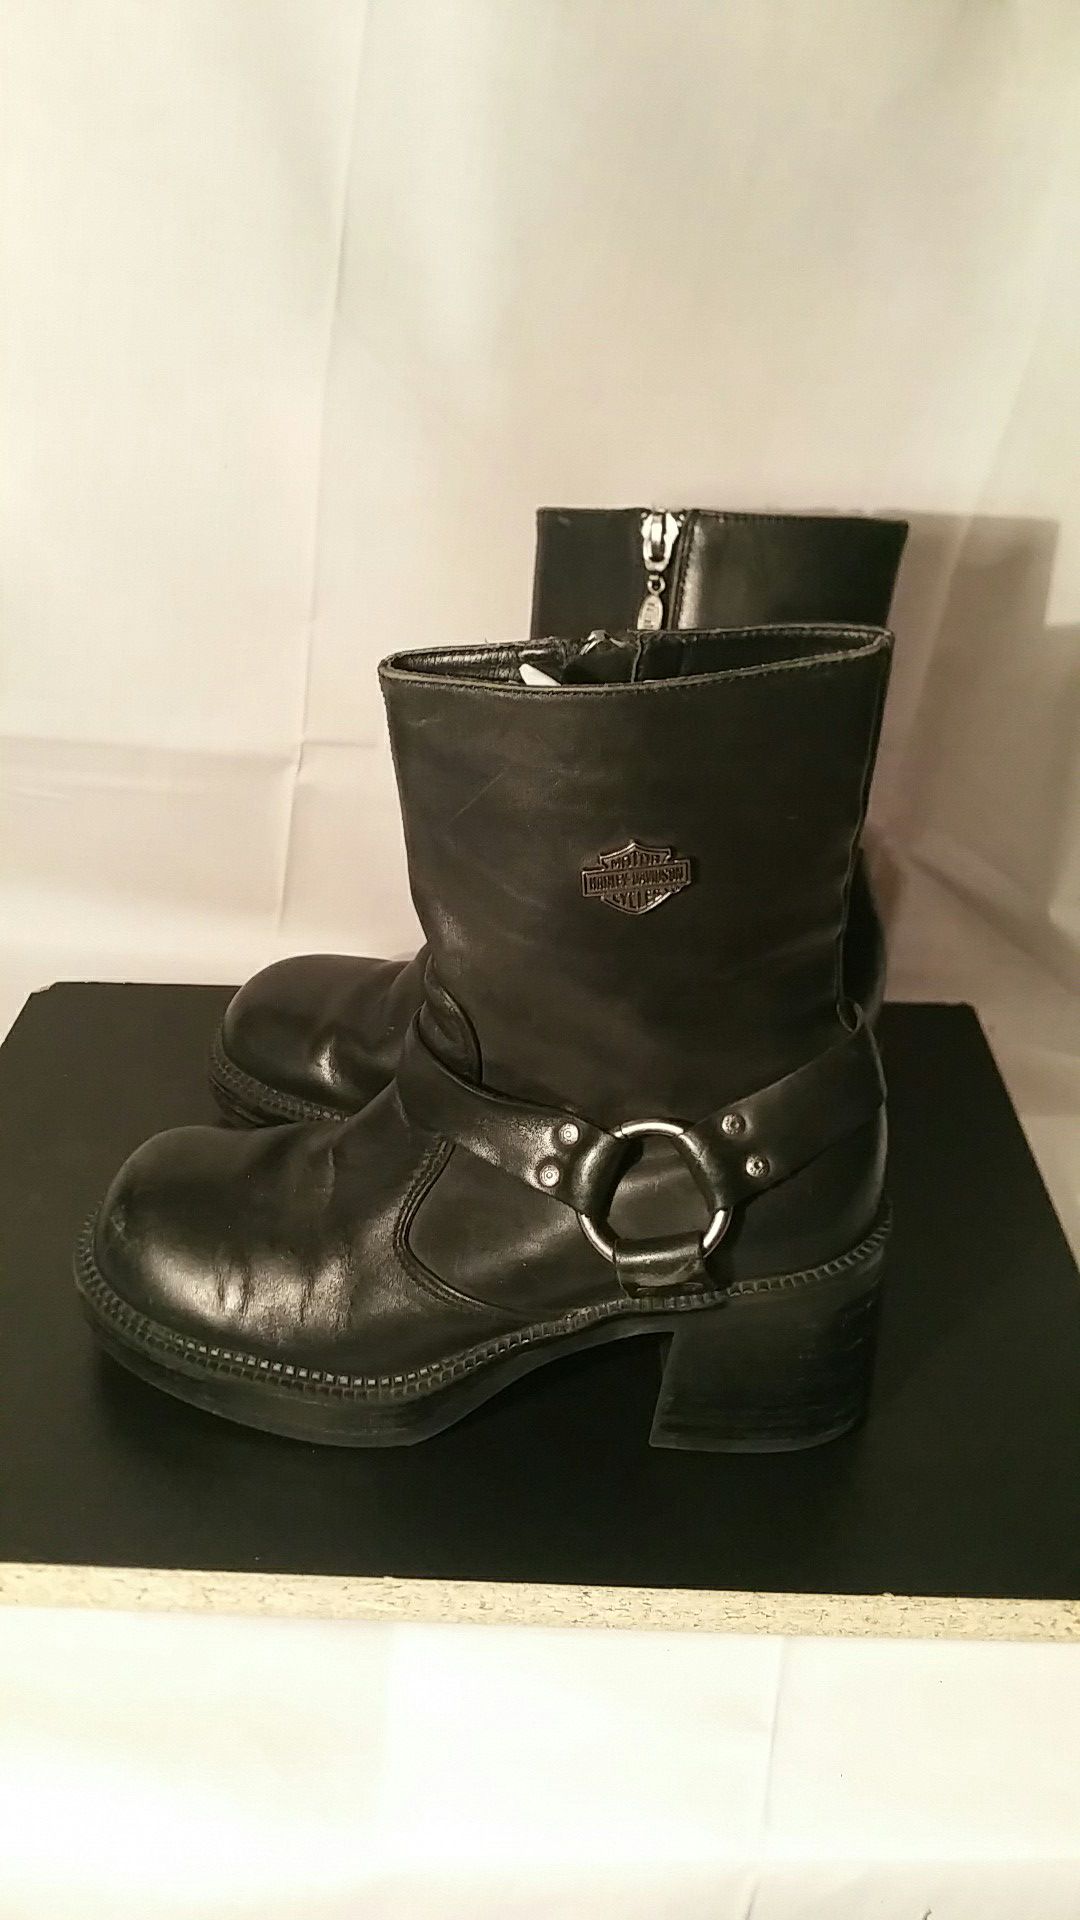 Harley Davidson motorcycle boots size 6